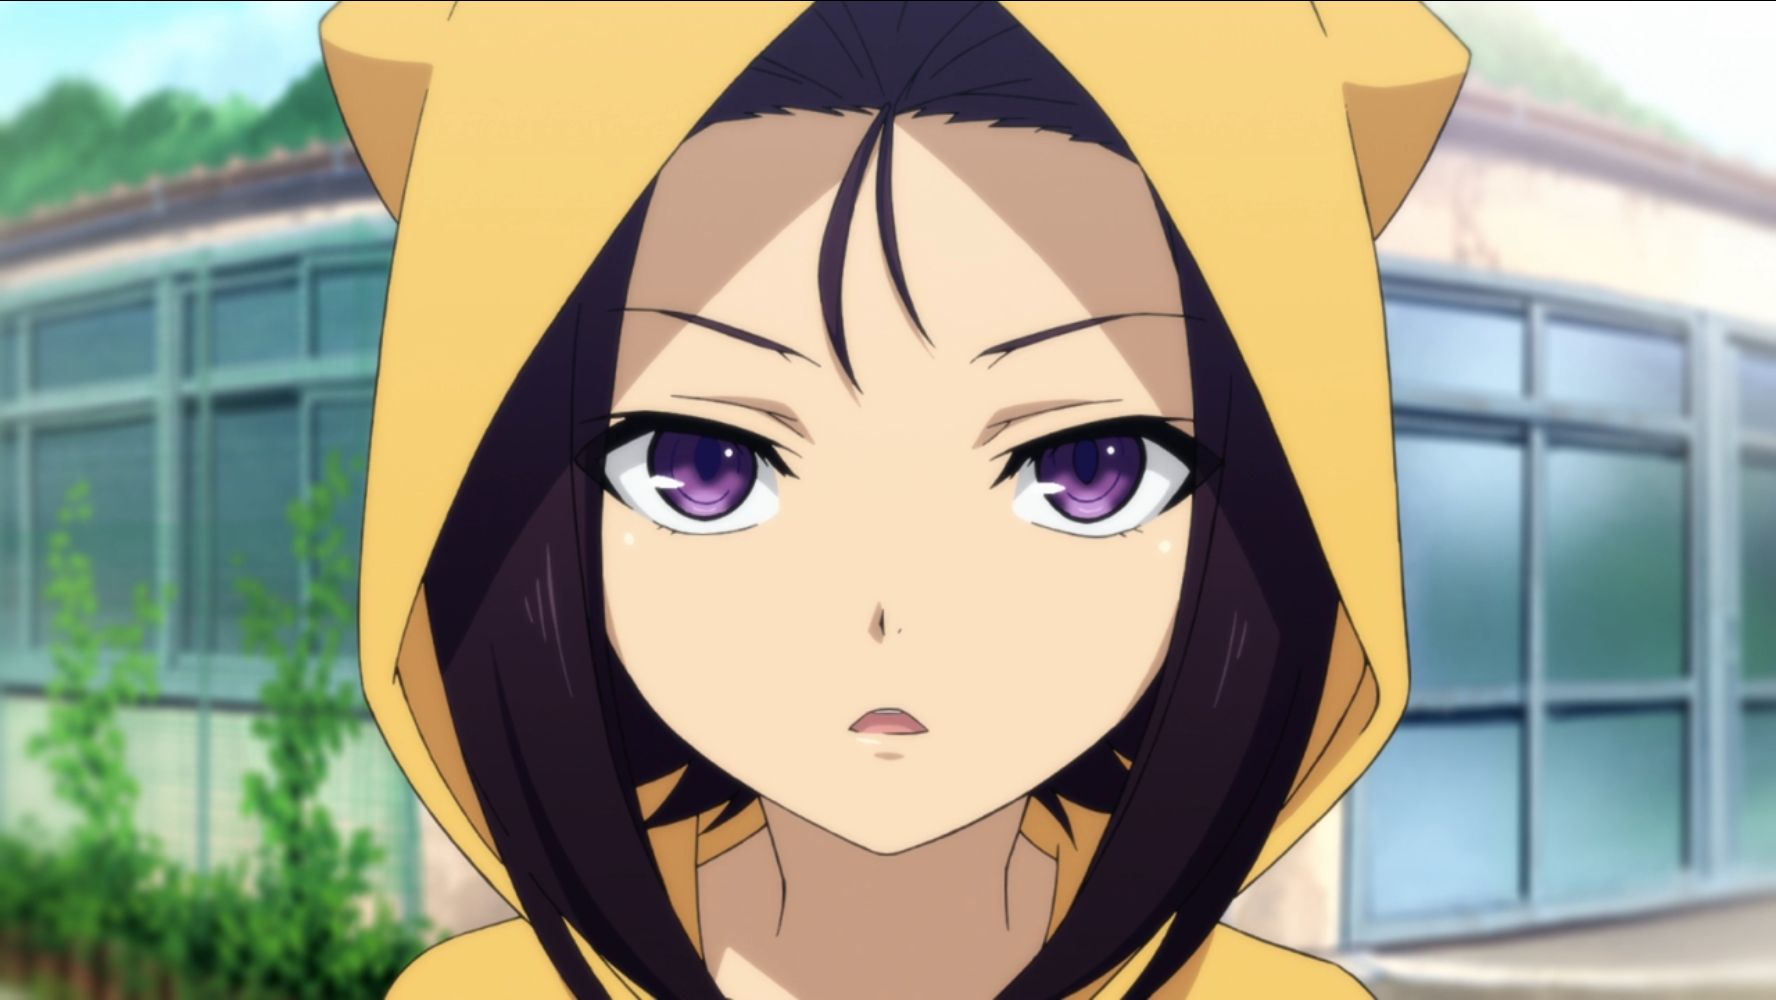 Clad in her trademark yellow rain coat with the cat ears on the hood, Lion makes a startling proclamation in a scene from the 2016 The Lost Village TV anime.